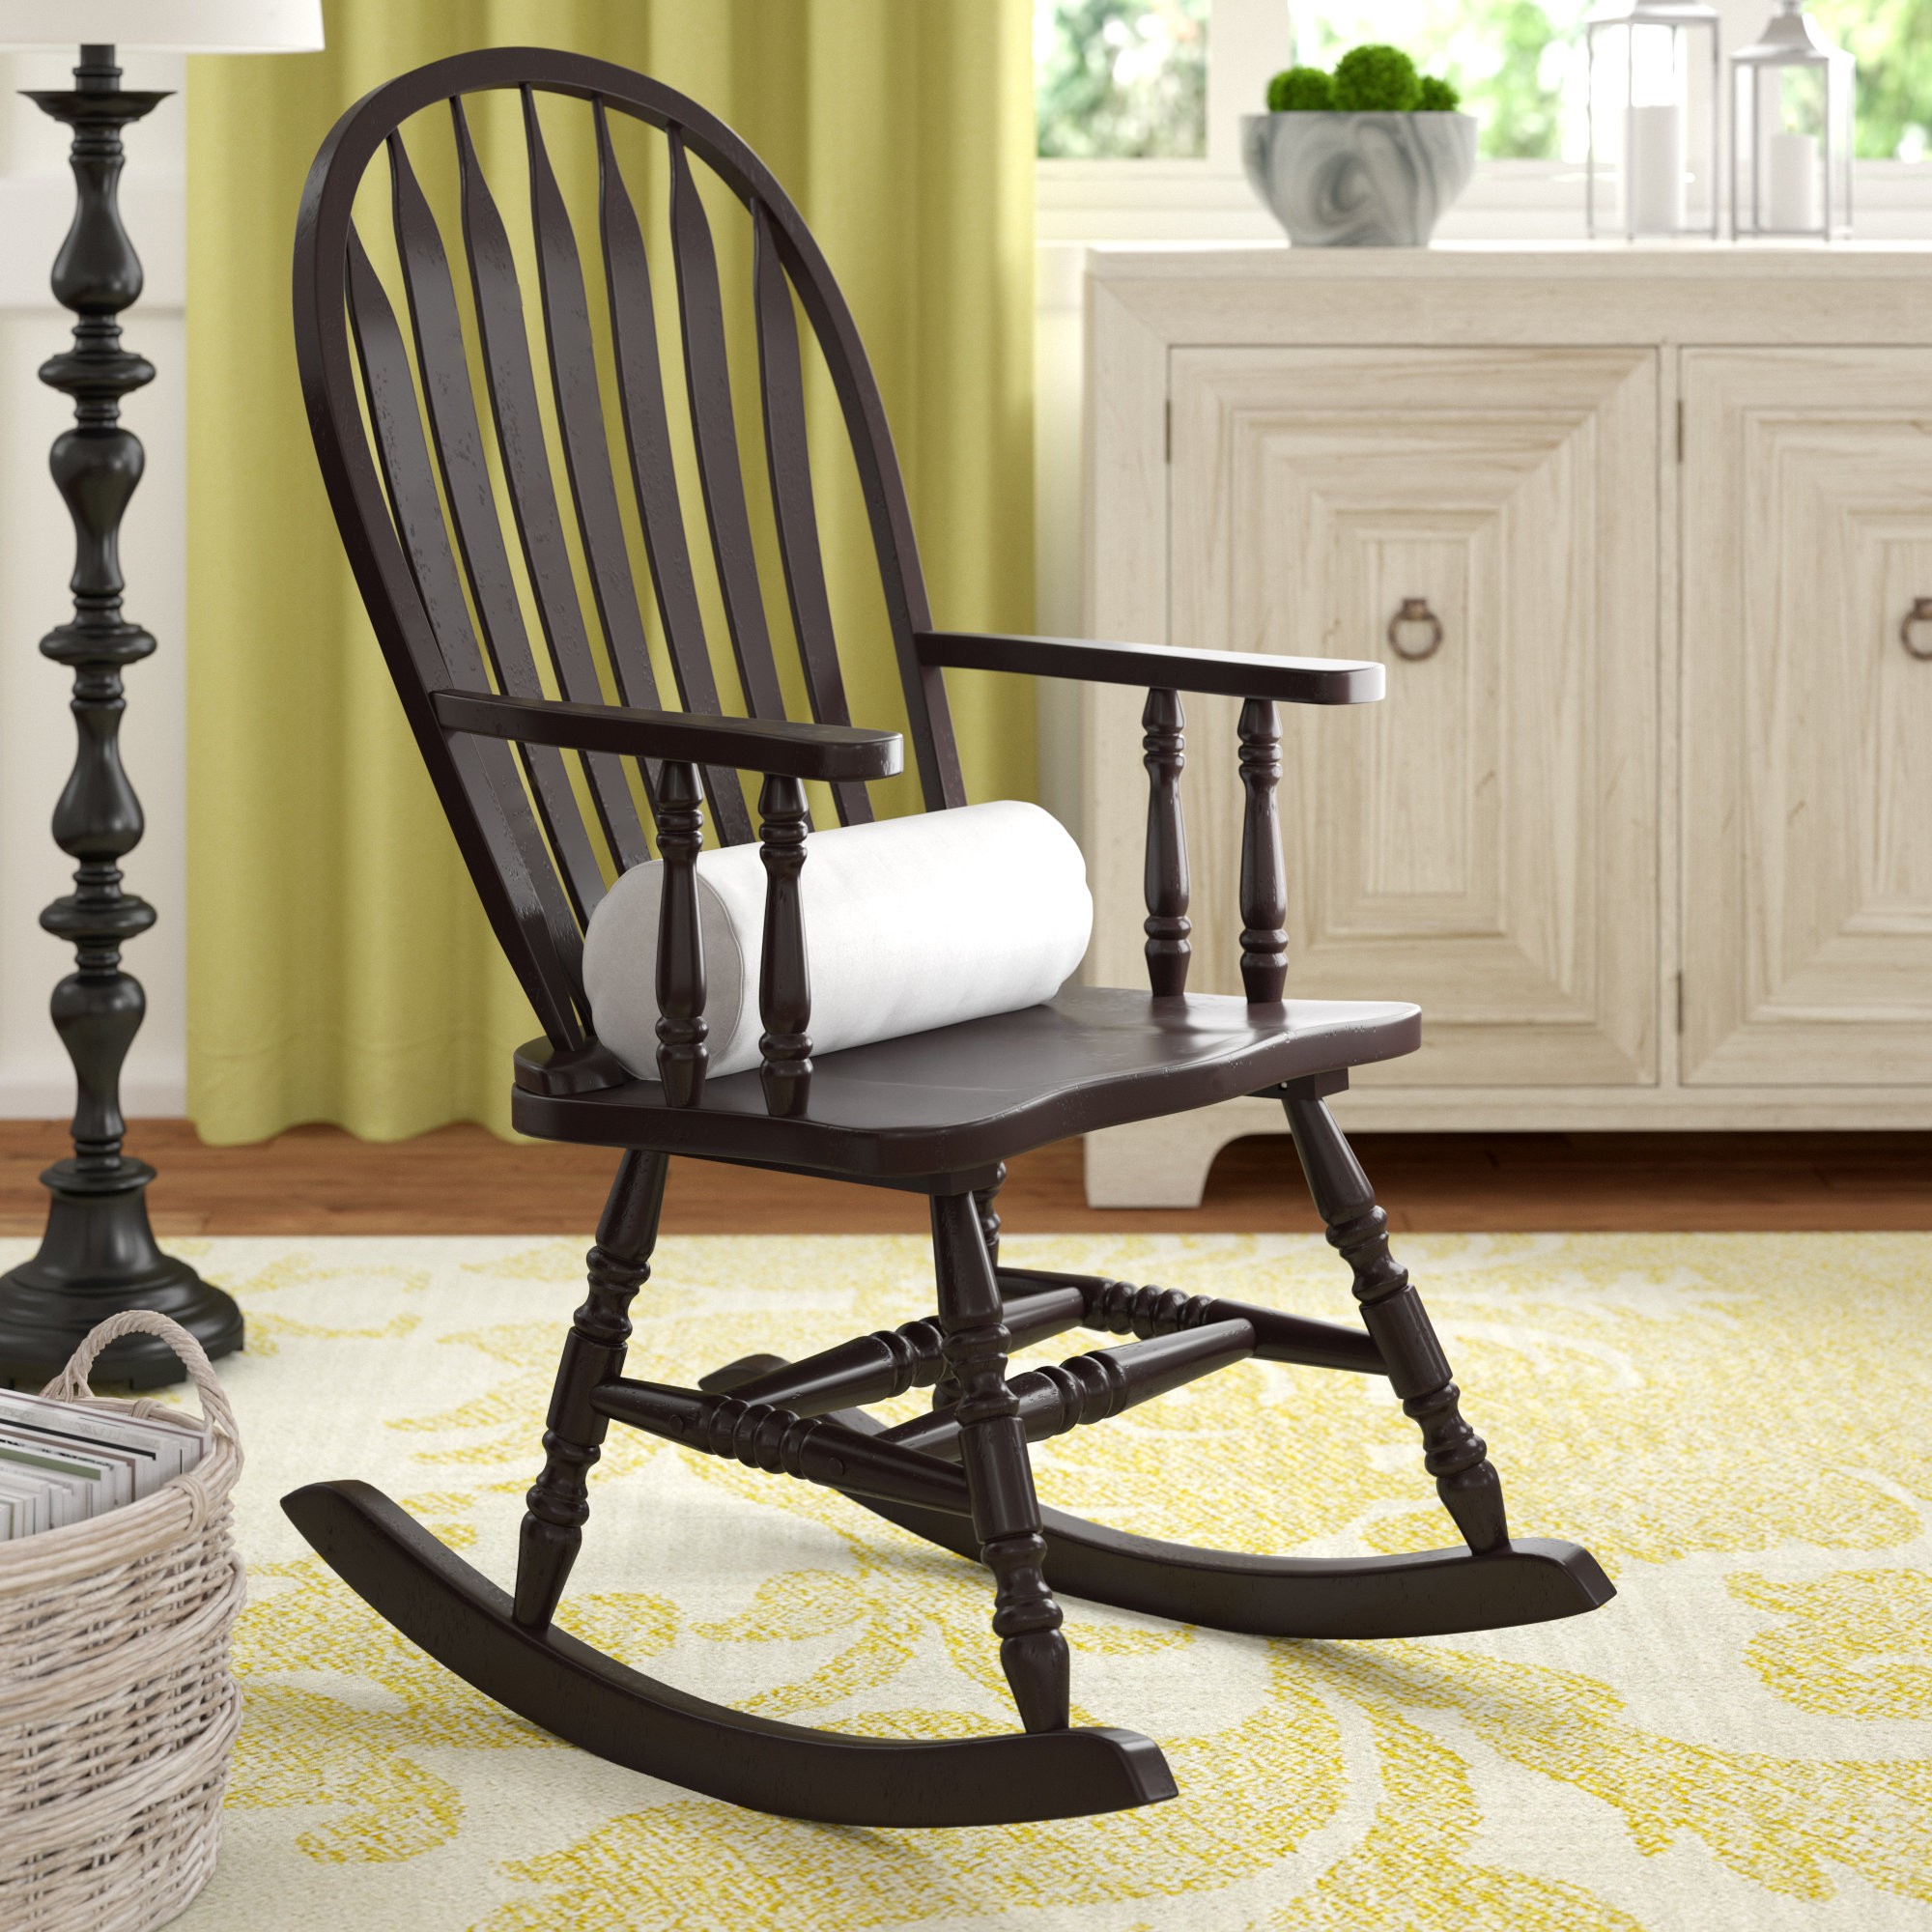 Traditional Rocking Chair With Arms